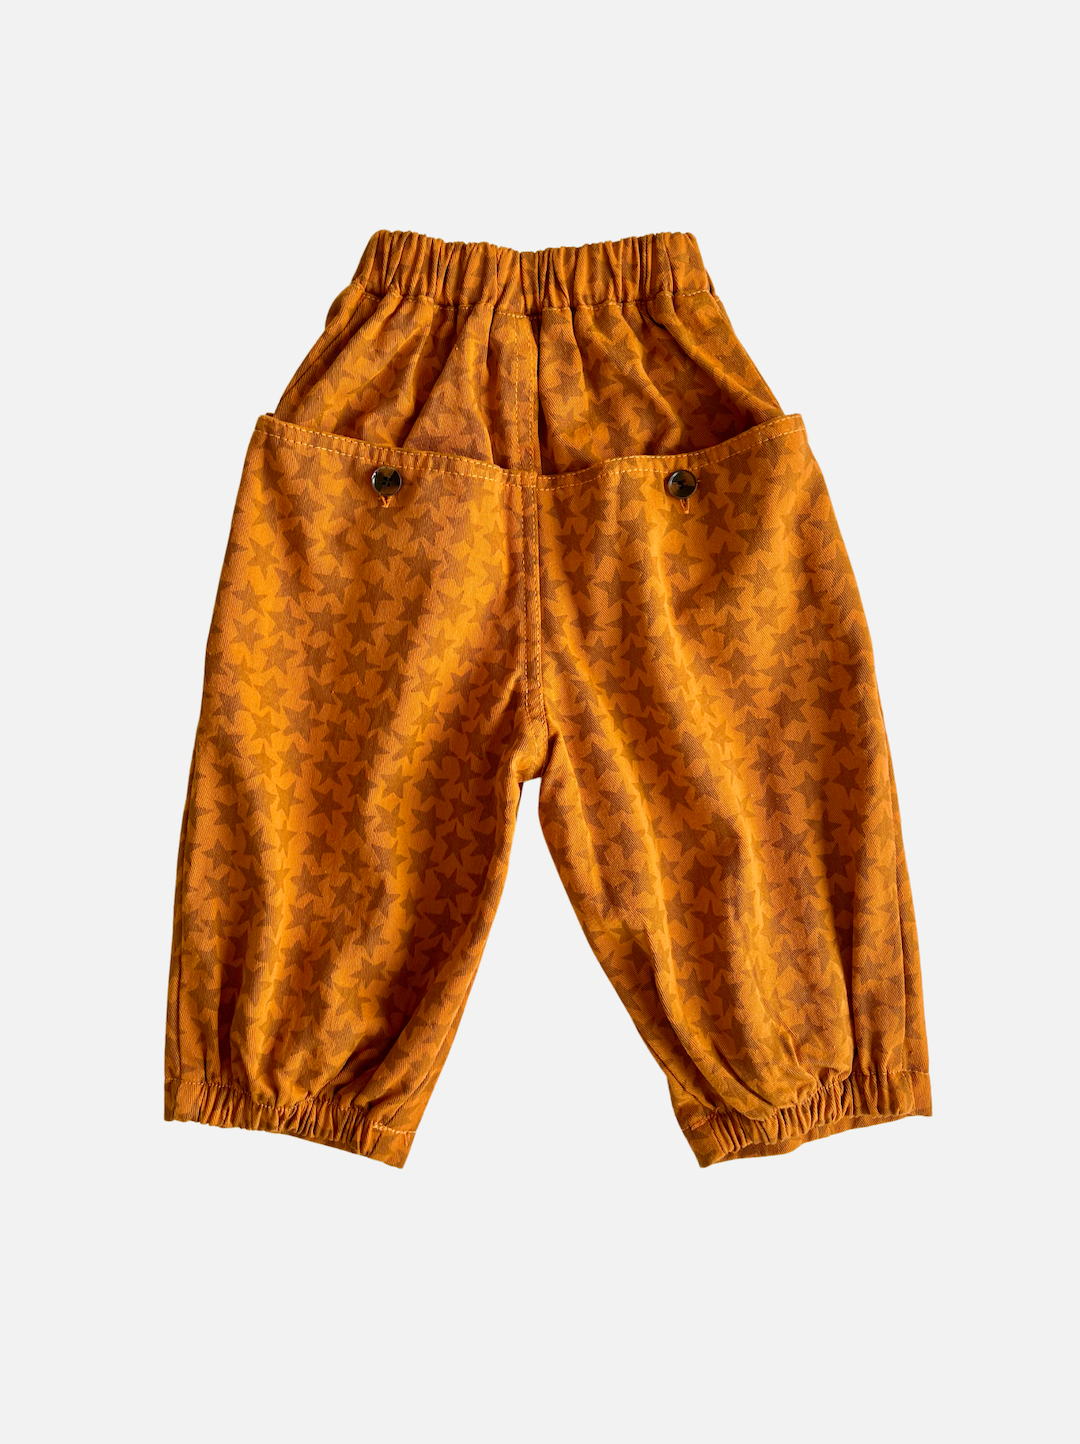 A pair of kids' pants in orange with rust star pattern and buttoned back pockets, rear view